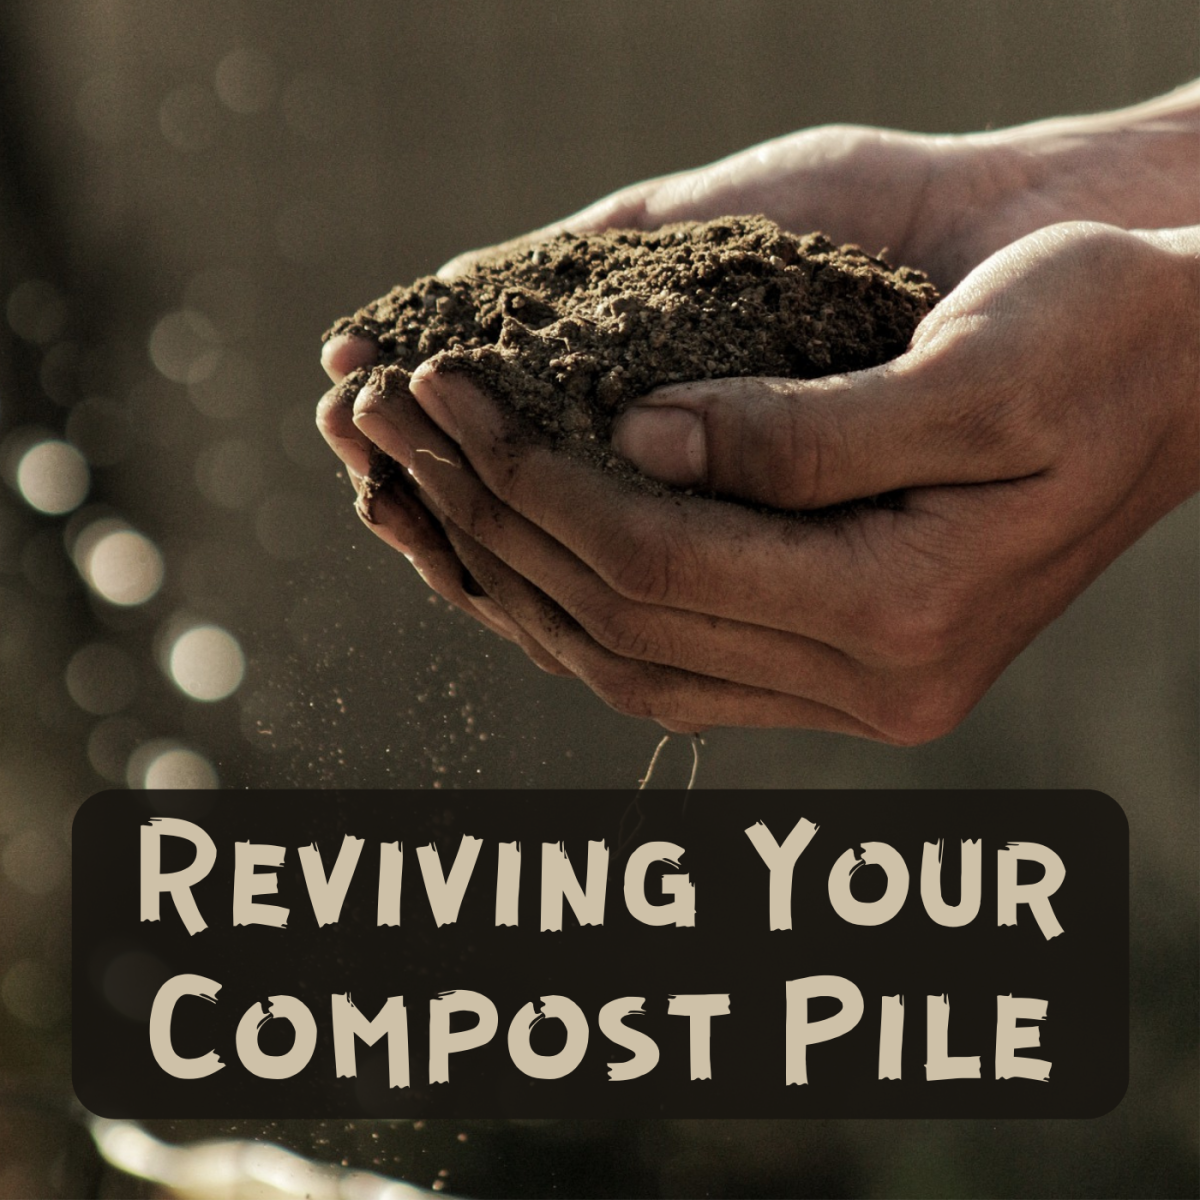 Follow this process to speed up decomposition in a dormant compost pile.